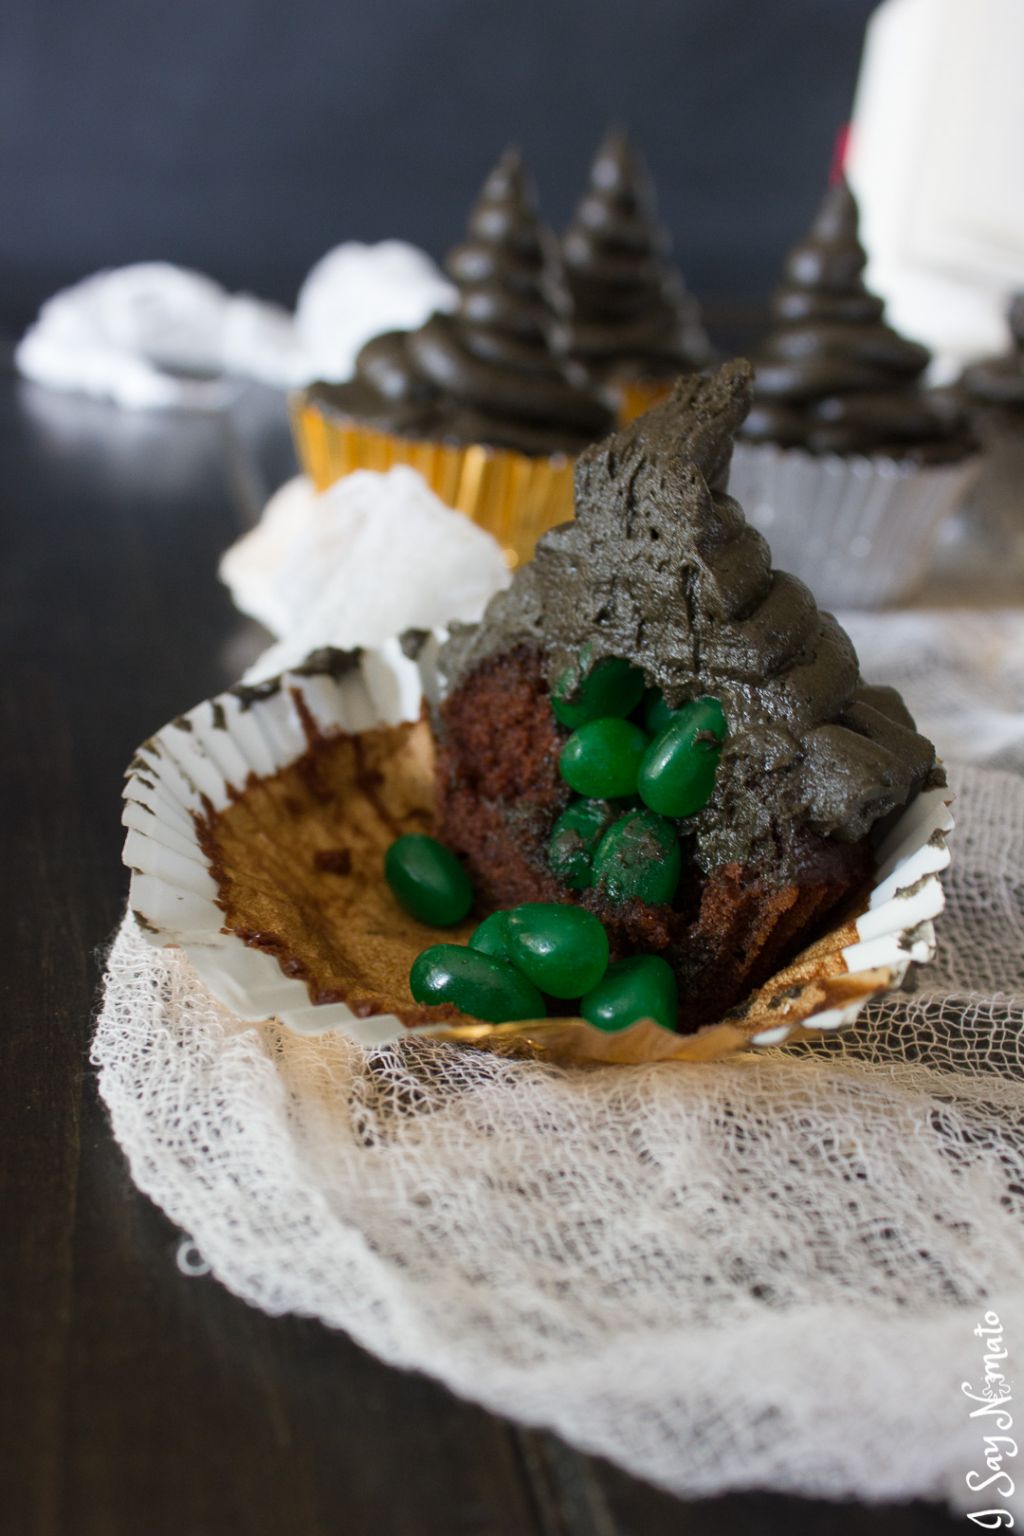 Harry Potter Inspired Sorting Hat Cupcakes - I Say Nomato